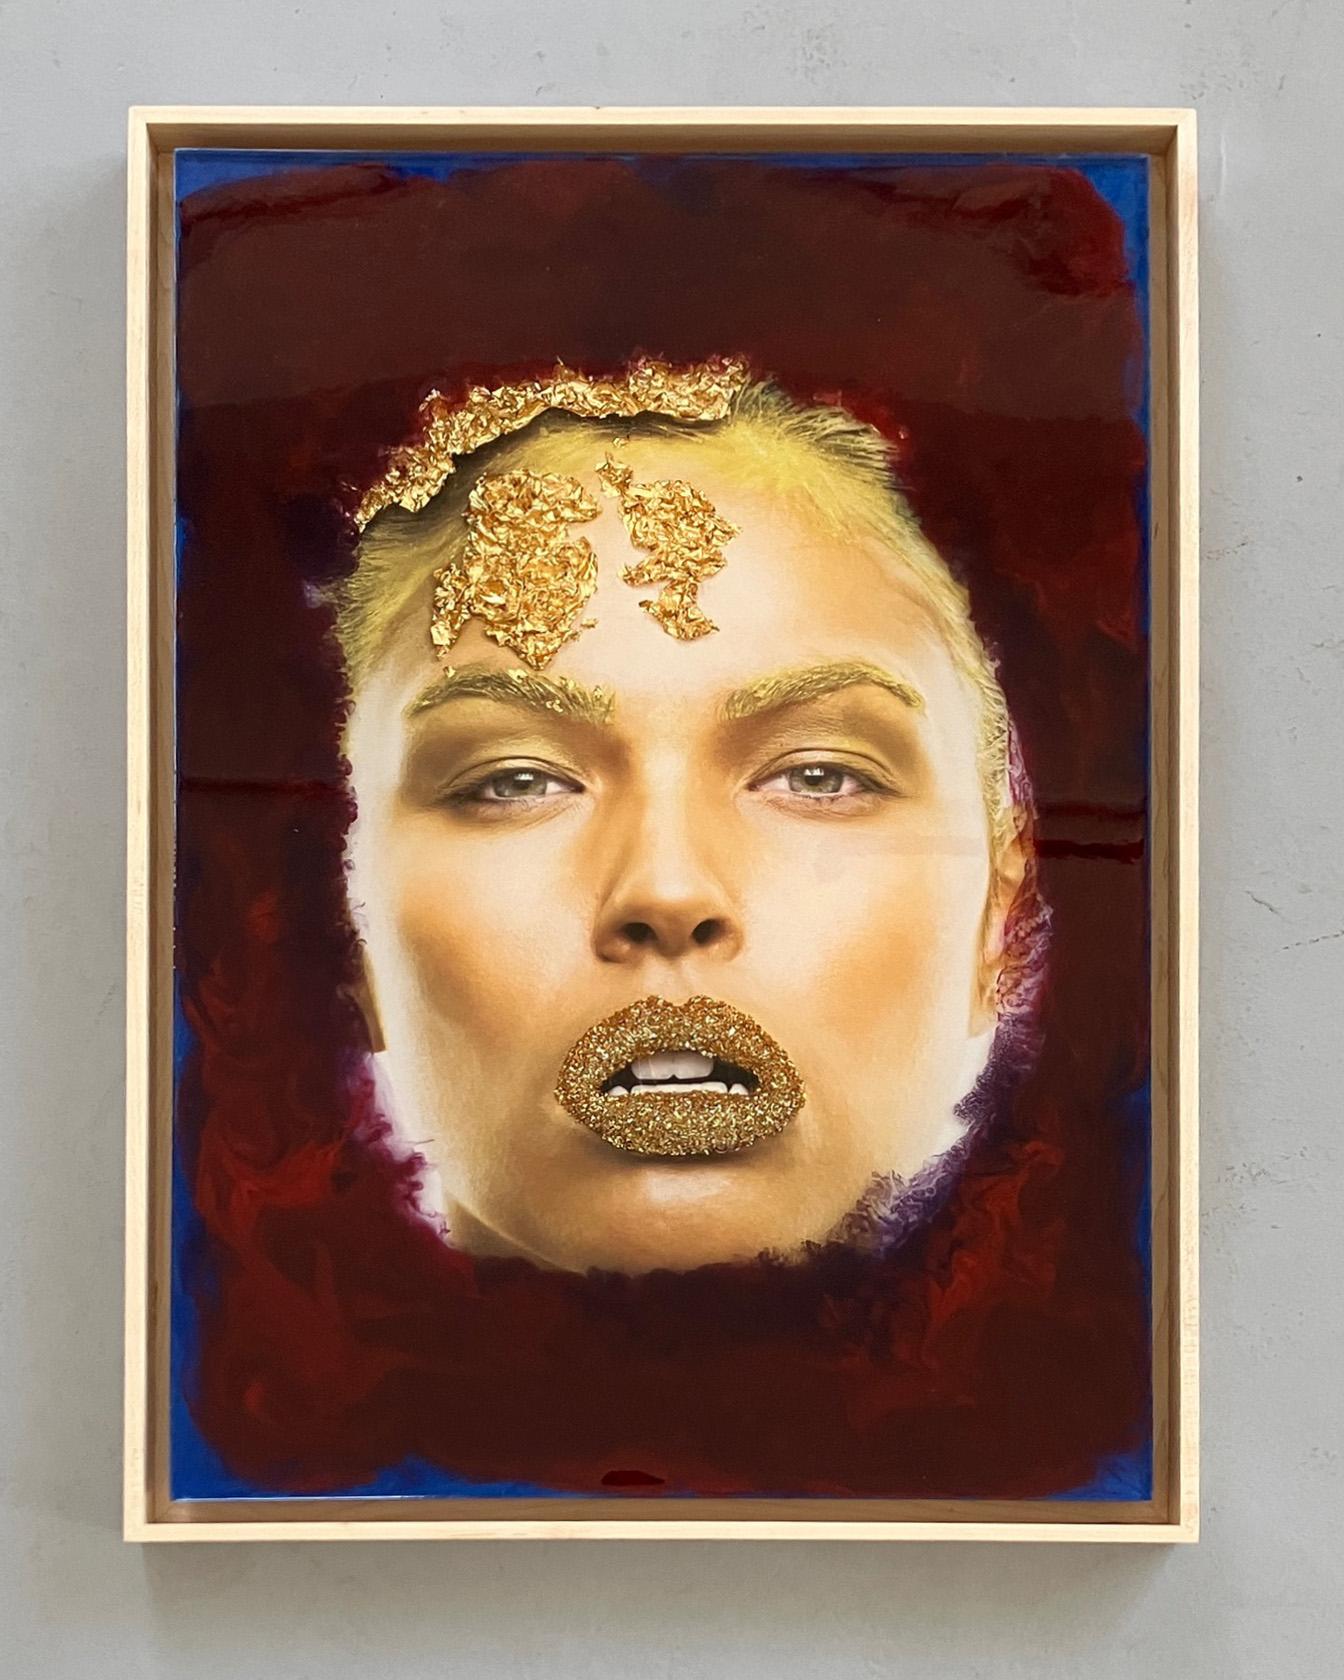 Gold Kiss 3D, 2023 by Koray Erkaya
Photograph printing directly on BBC metal. 24 carat gold leafs and gold glitters are processed on this print. Afterwards, epoxy is poured in layers and the coloring process is carried out. Each piece becomes a